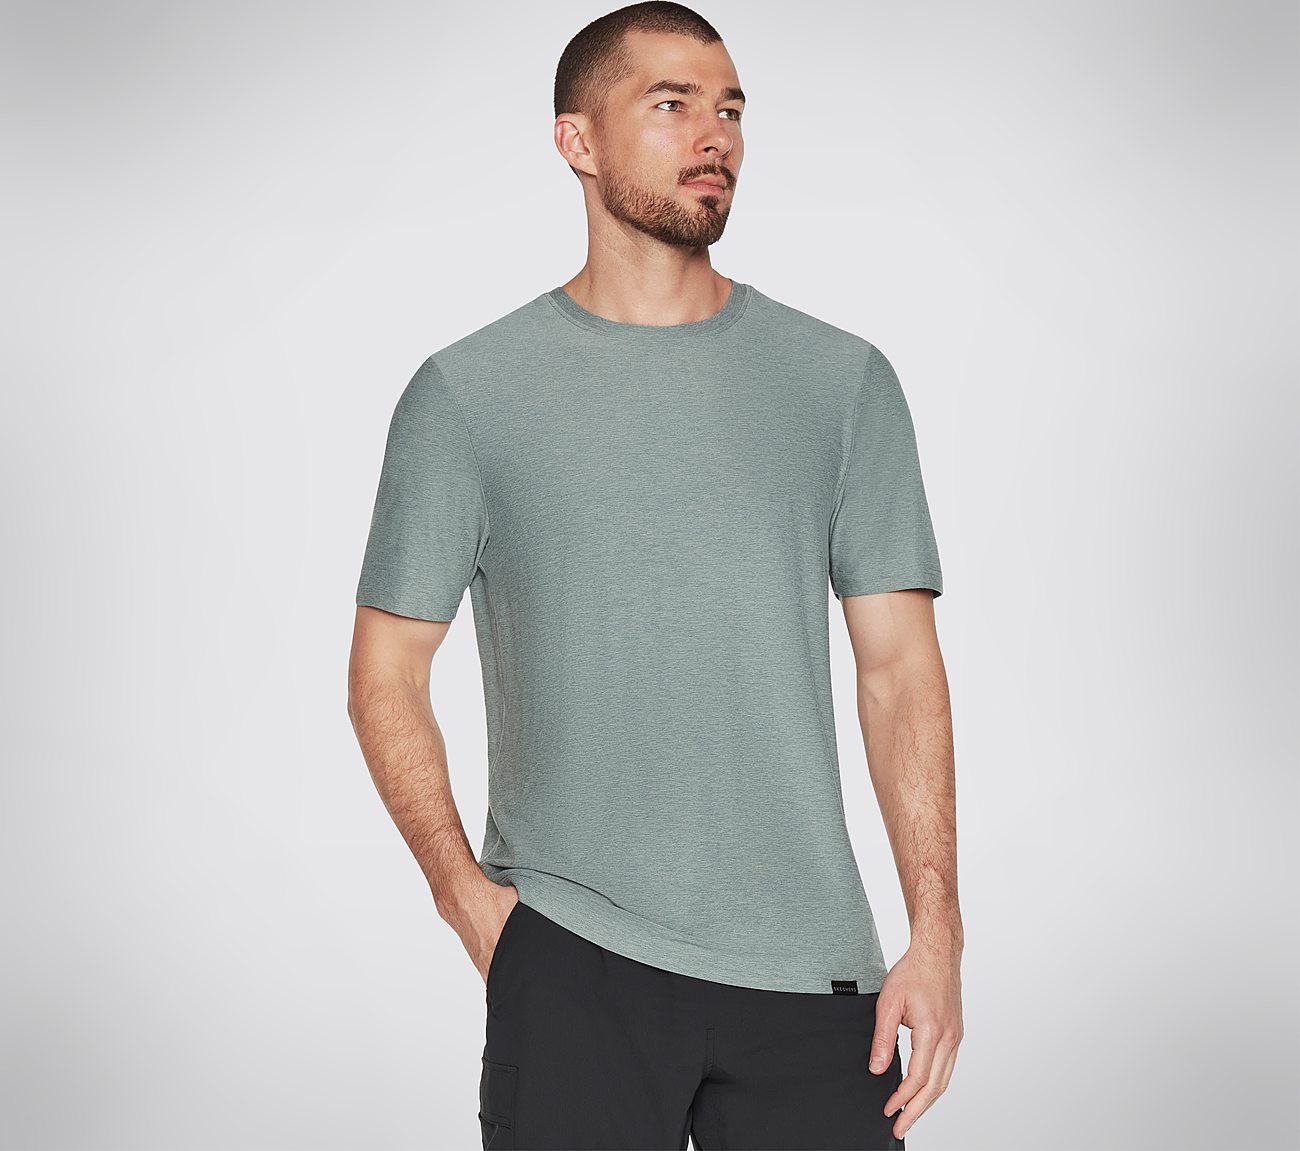 GODRI ALL DAY TEE, TEAL/BLUE Apparels Lateral View